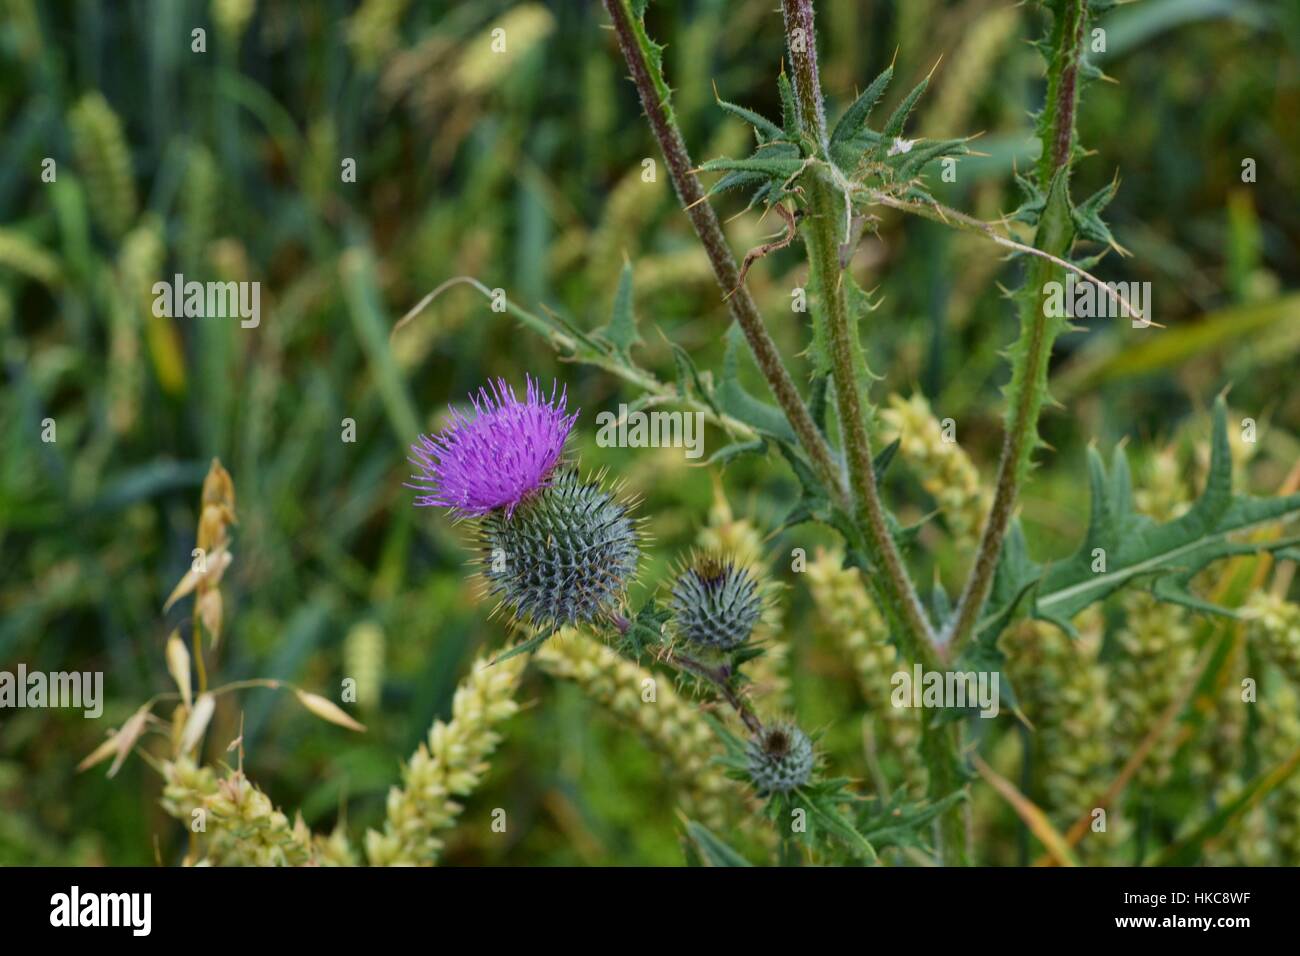 a thistle Stock Photo